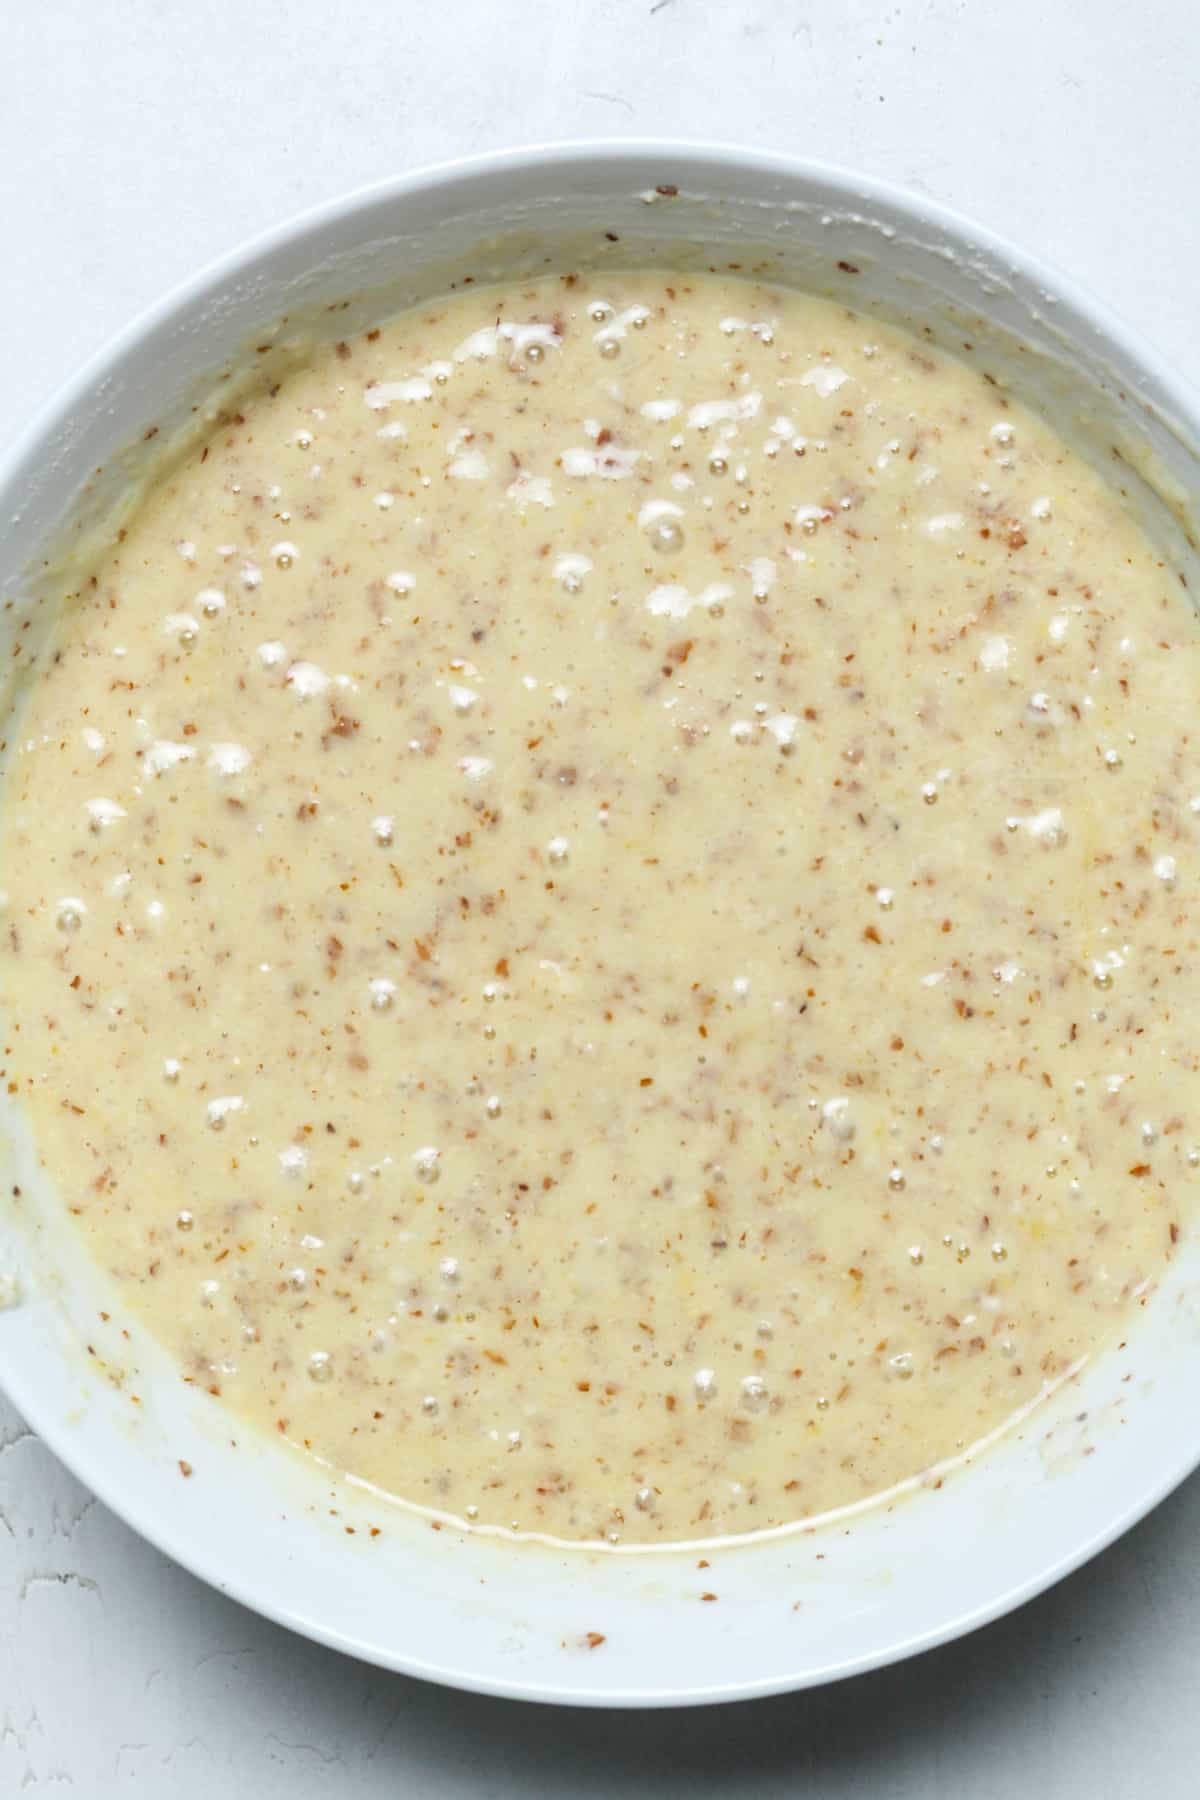 Thin and runny muffin batter